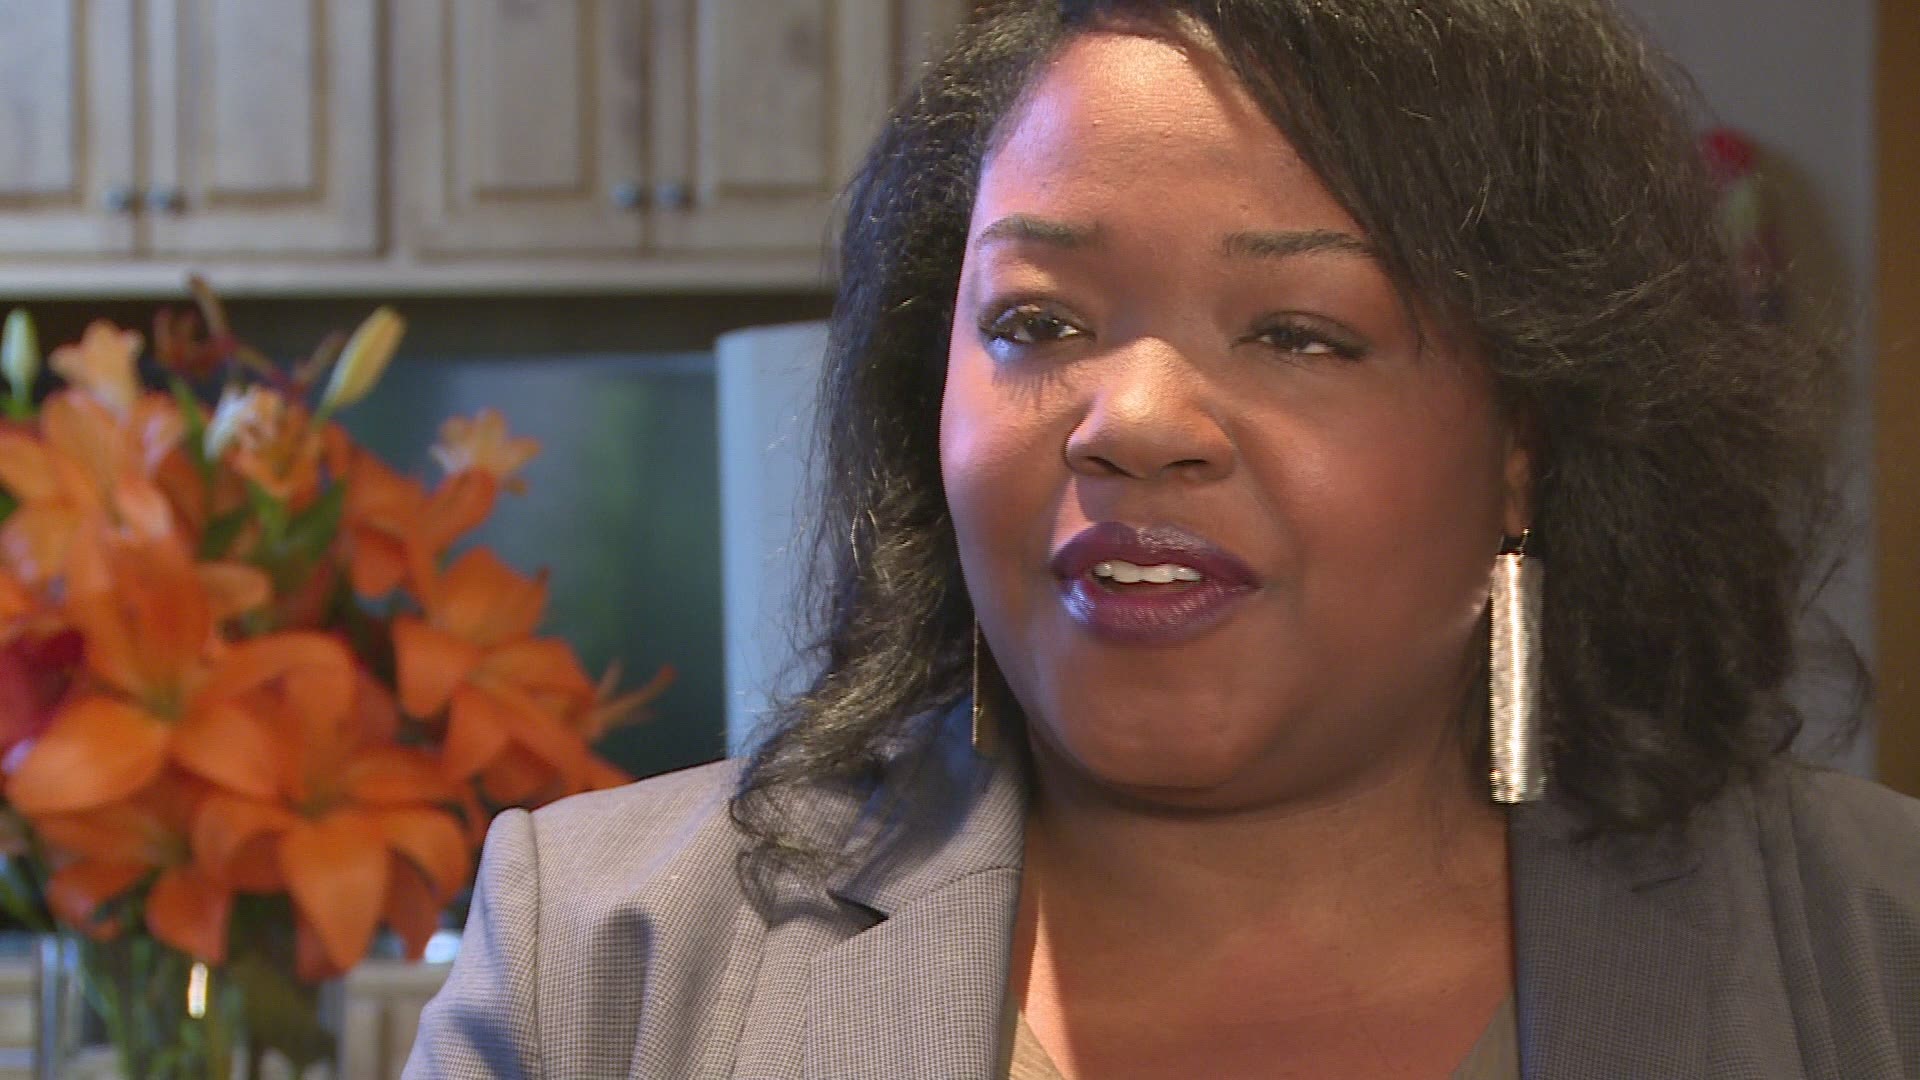 Ebony Clarke, who now serves as the director of Multnomah County's Mental Health and Addiction Services Division, talked to KGW about what it's like to grow up in a rehabilitation center in N Portland.